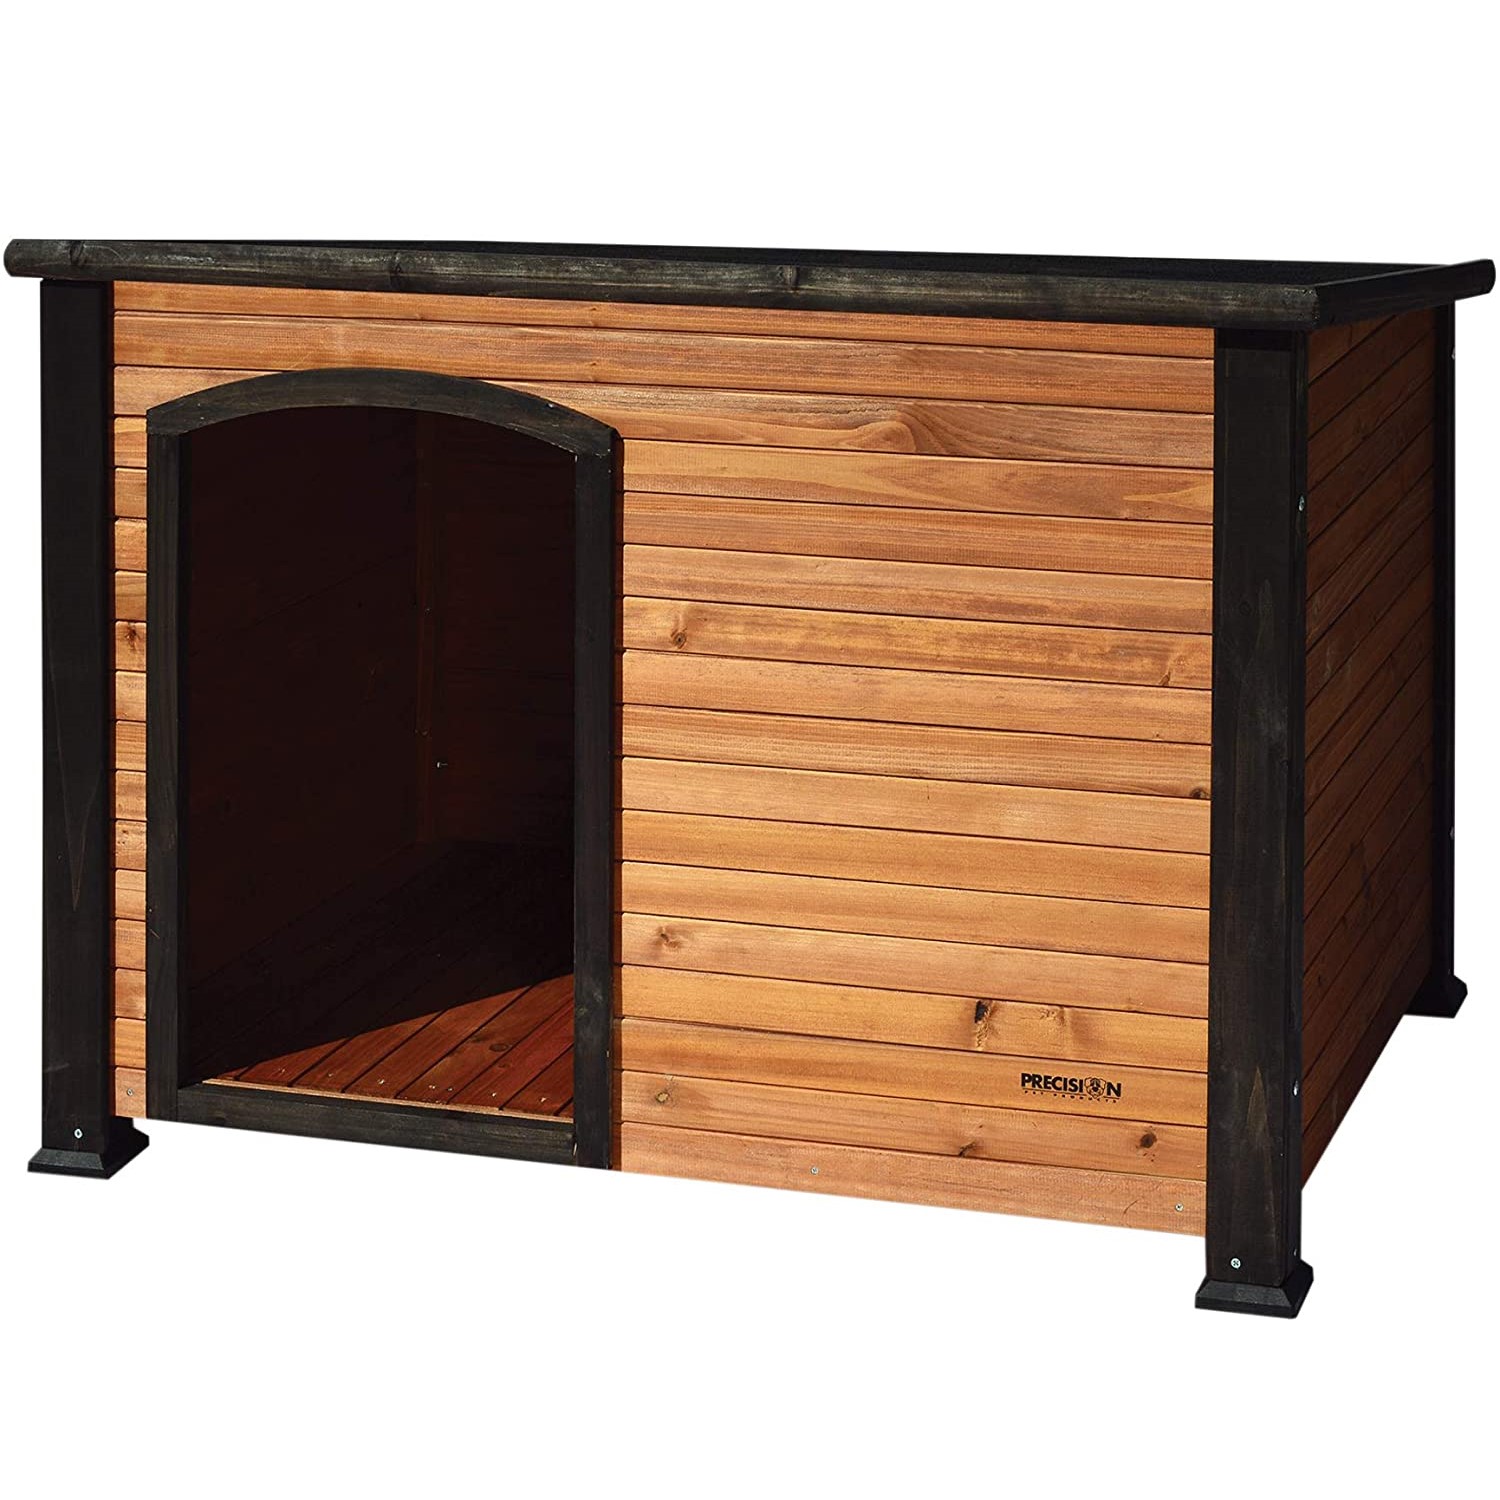 The Best Dog House: Petmate Precision Extreme Outback Log Cabin